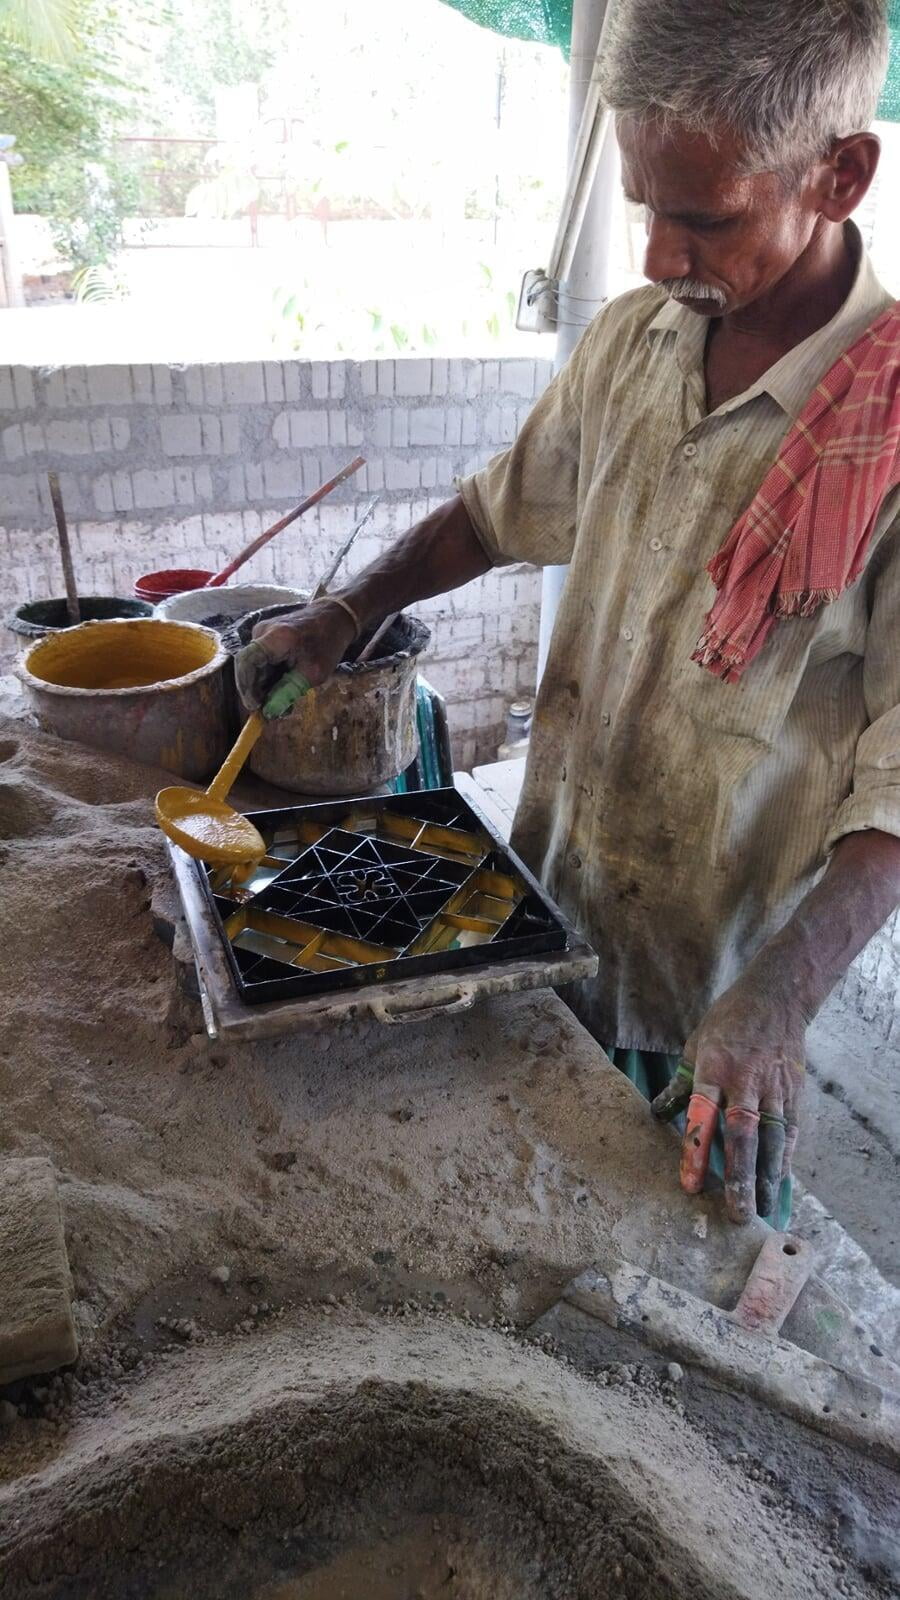 An elderly male artisan in the process of making an Athangudi tile. A metal frame containing the pattern of the tile is placed on a platform. The artisan is pouring yellow paint into the frame with a ladle. 